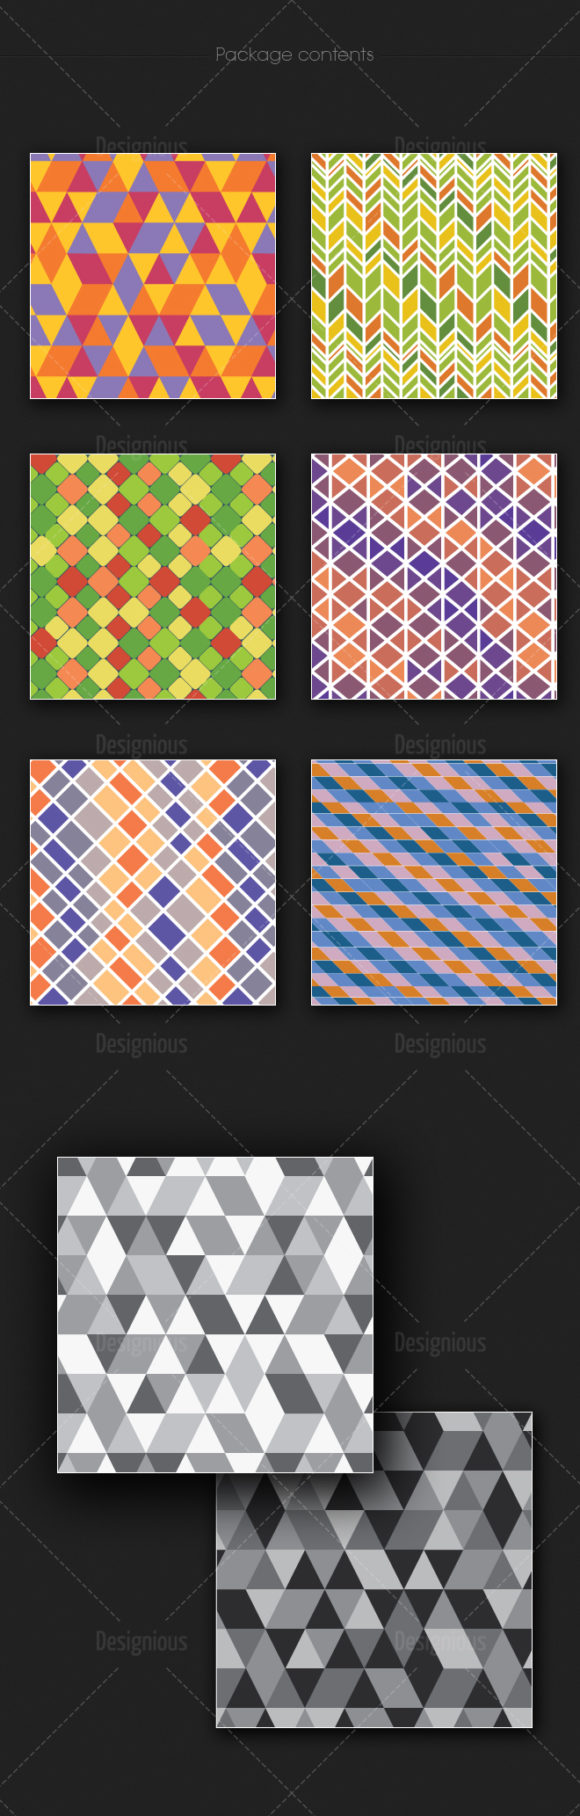 Seamless Patterns Vector Pack 170 2